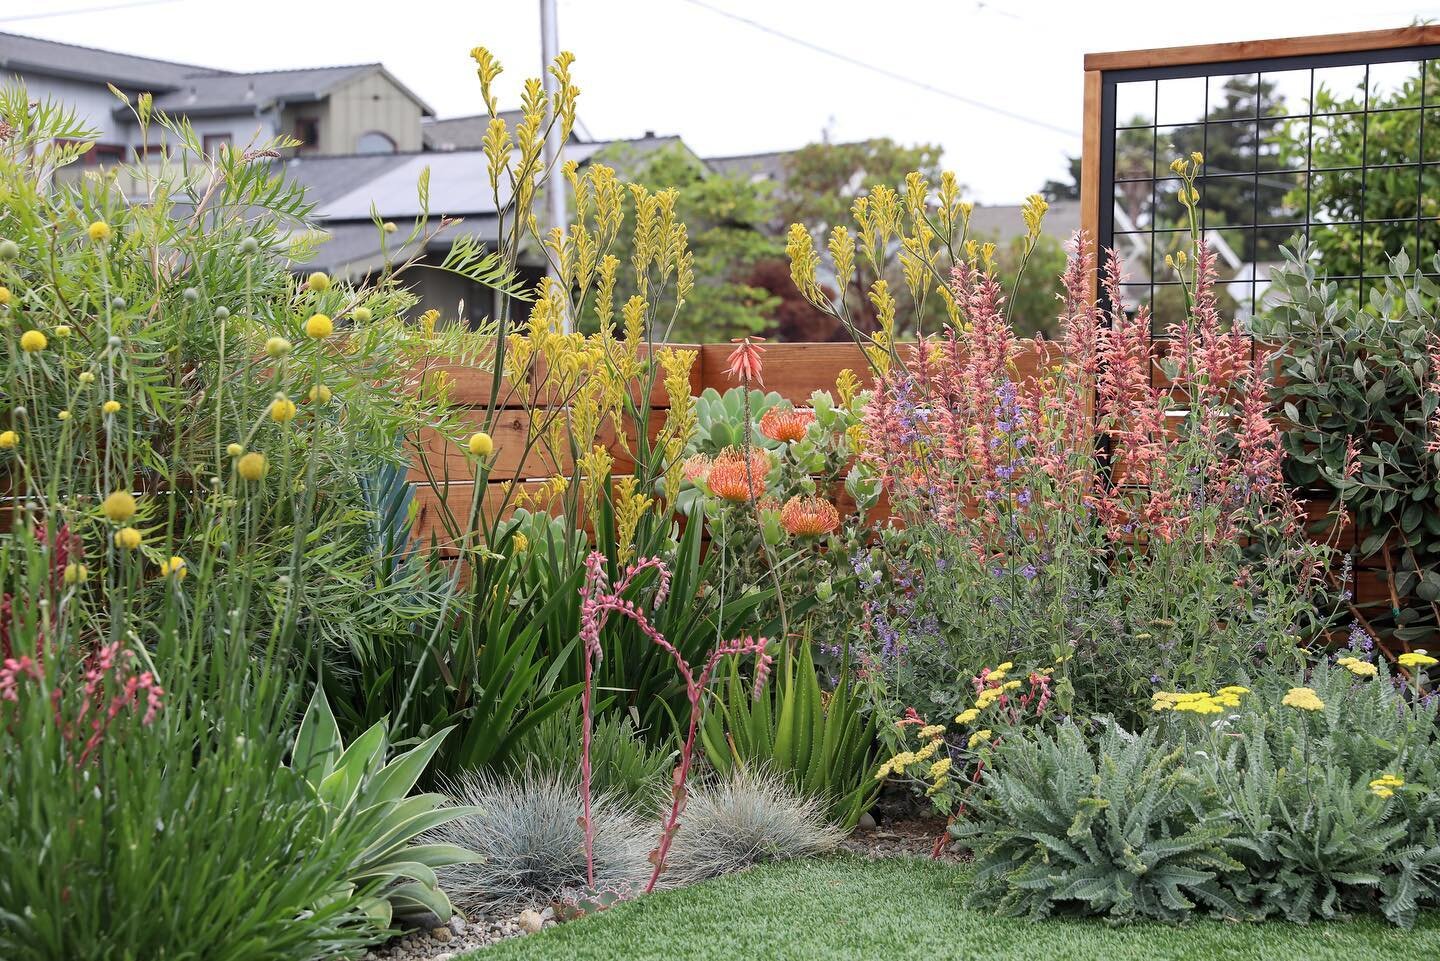 Succulents, perennials, and shrubs - oh my! We love fun and creative plant combos, and sustainability is at the center of every design decision we make. Your yard should be part of the solution, not the problem. Water conservation is more important t